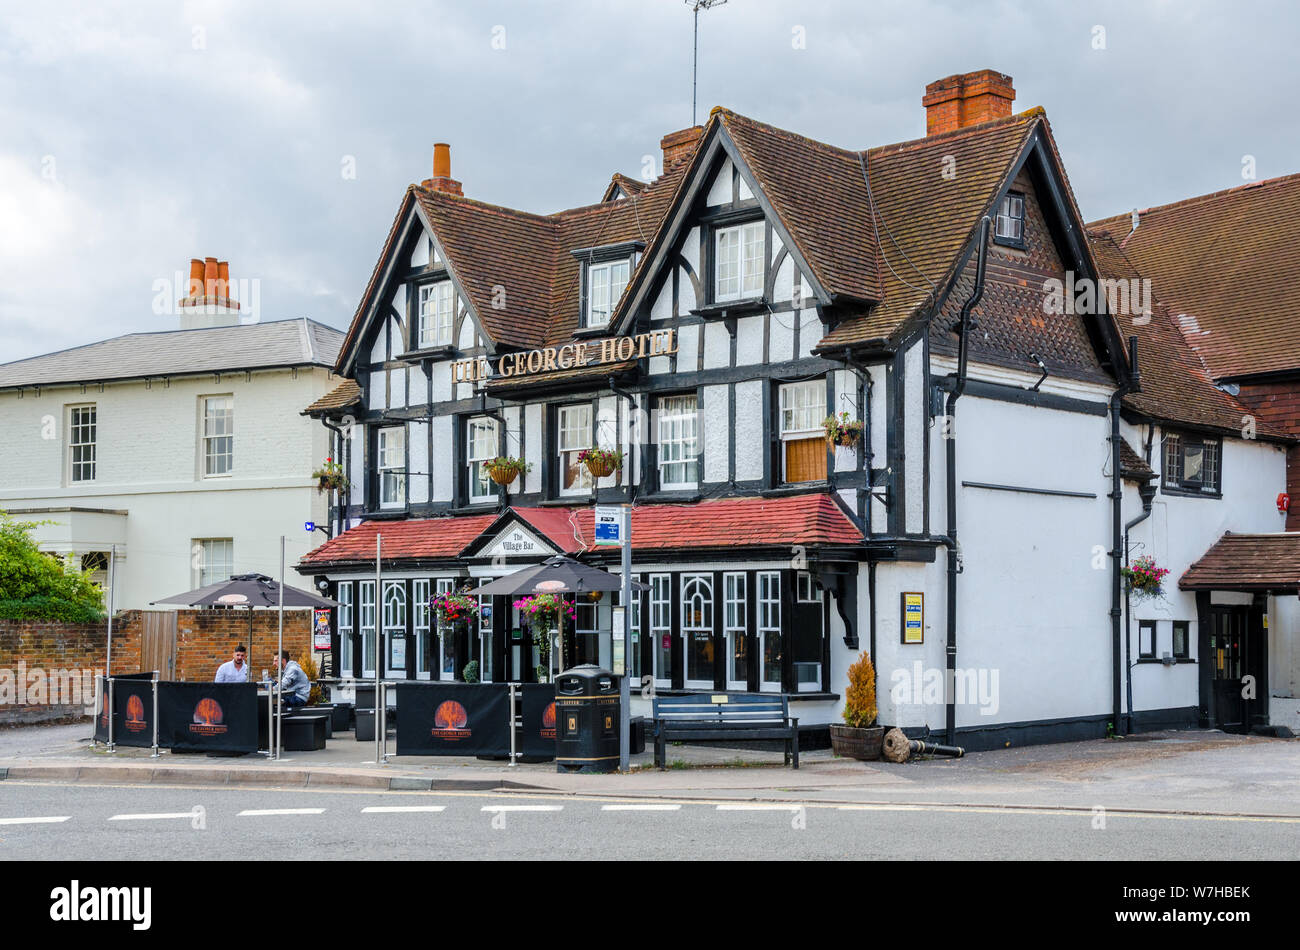 The George Hotel in the village of Pangbourne in West Berkshire, UK Stock Photo